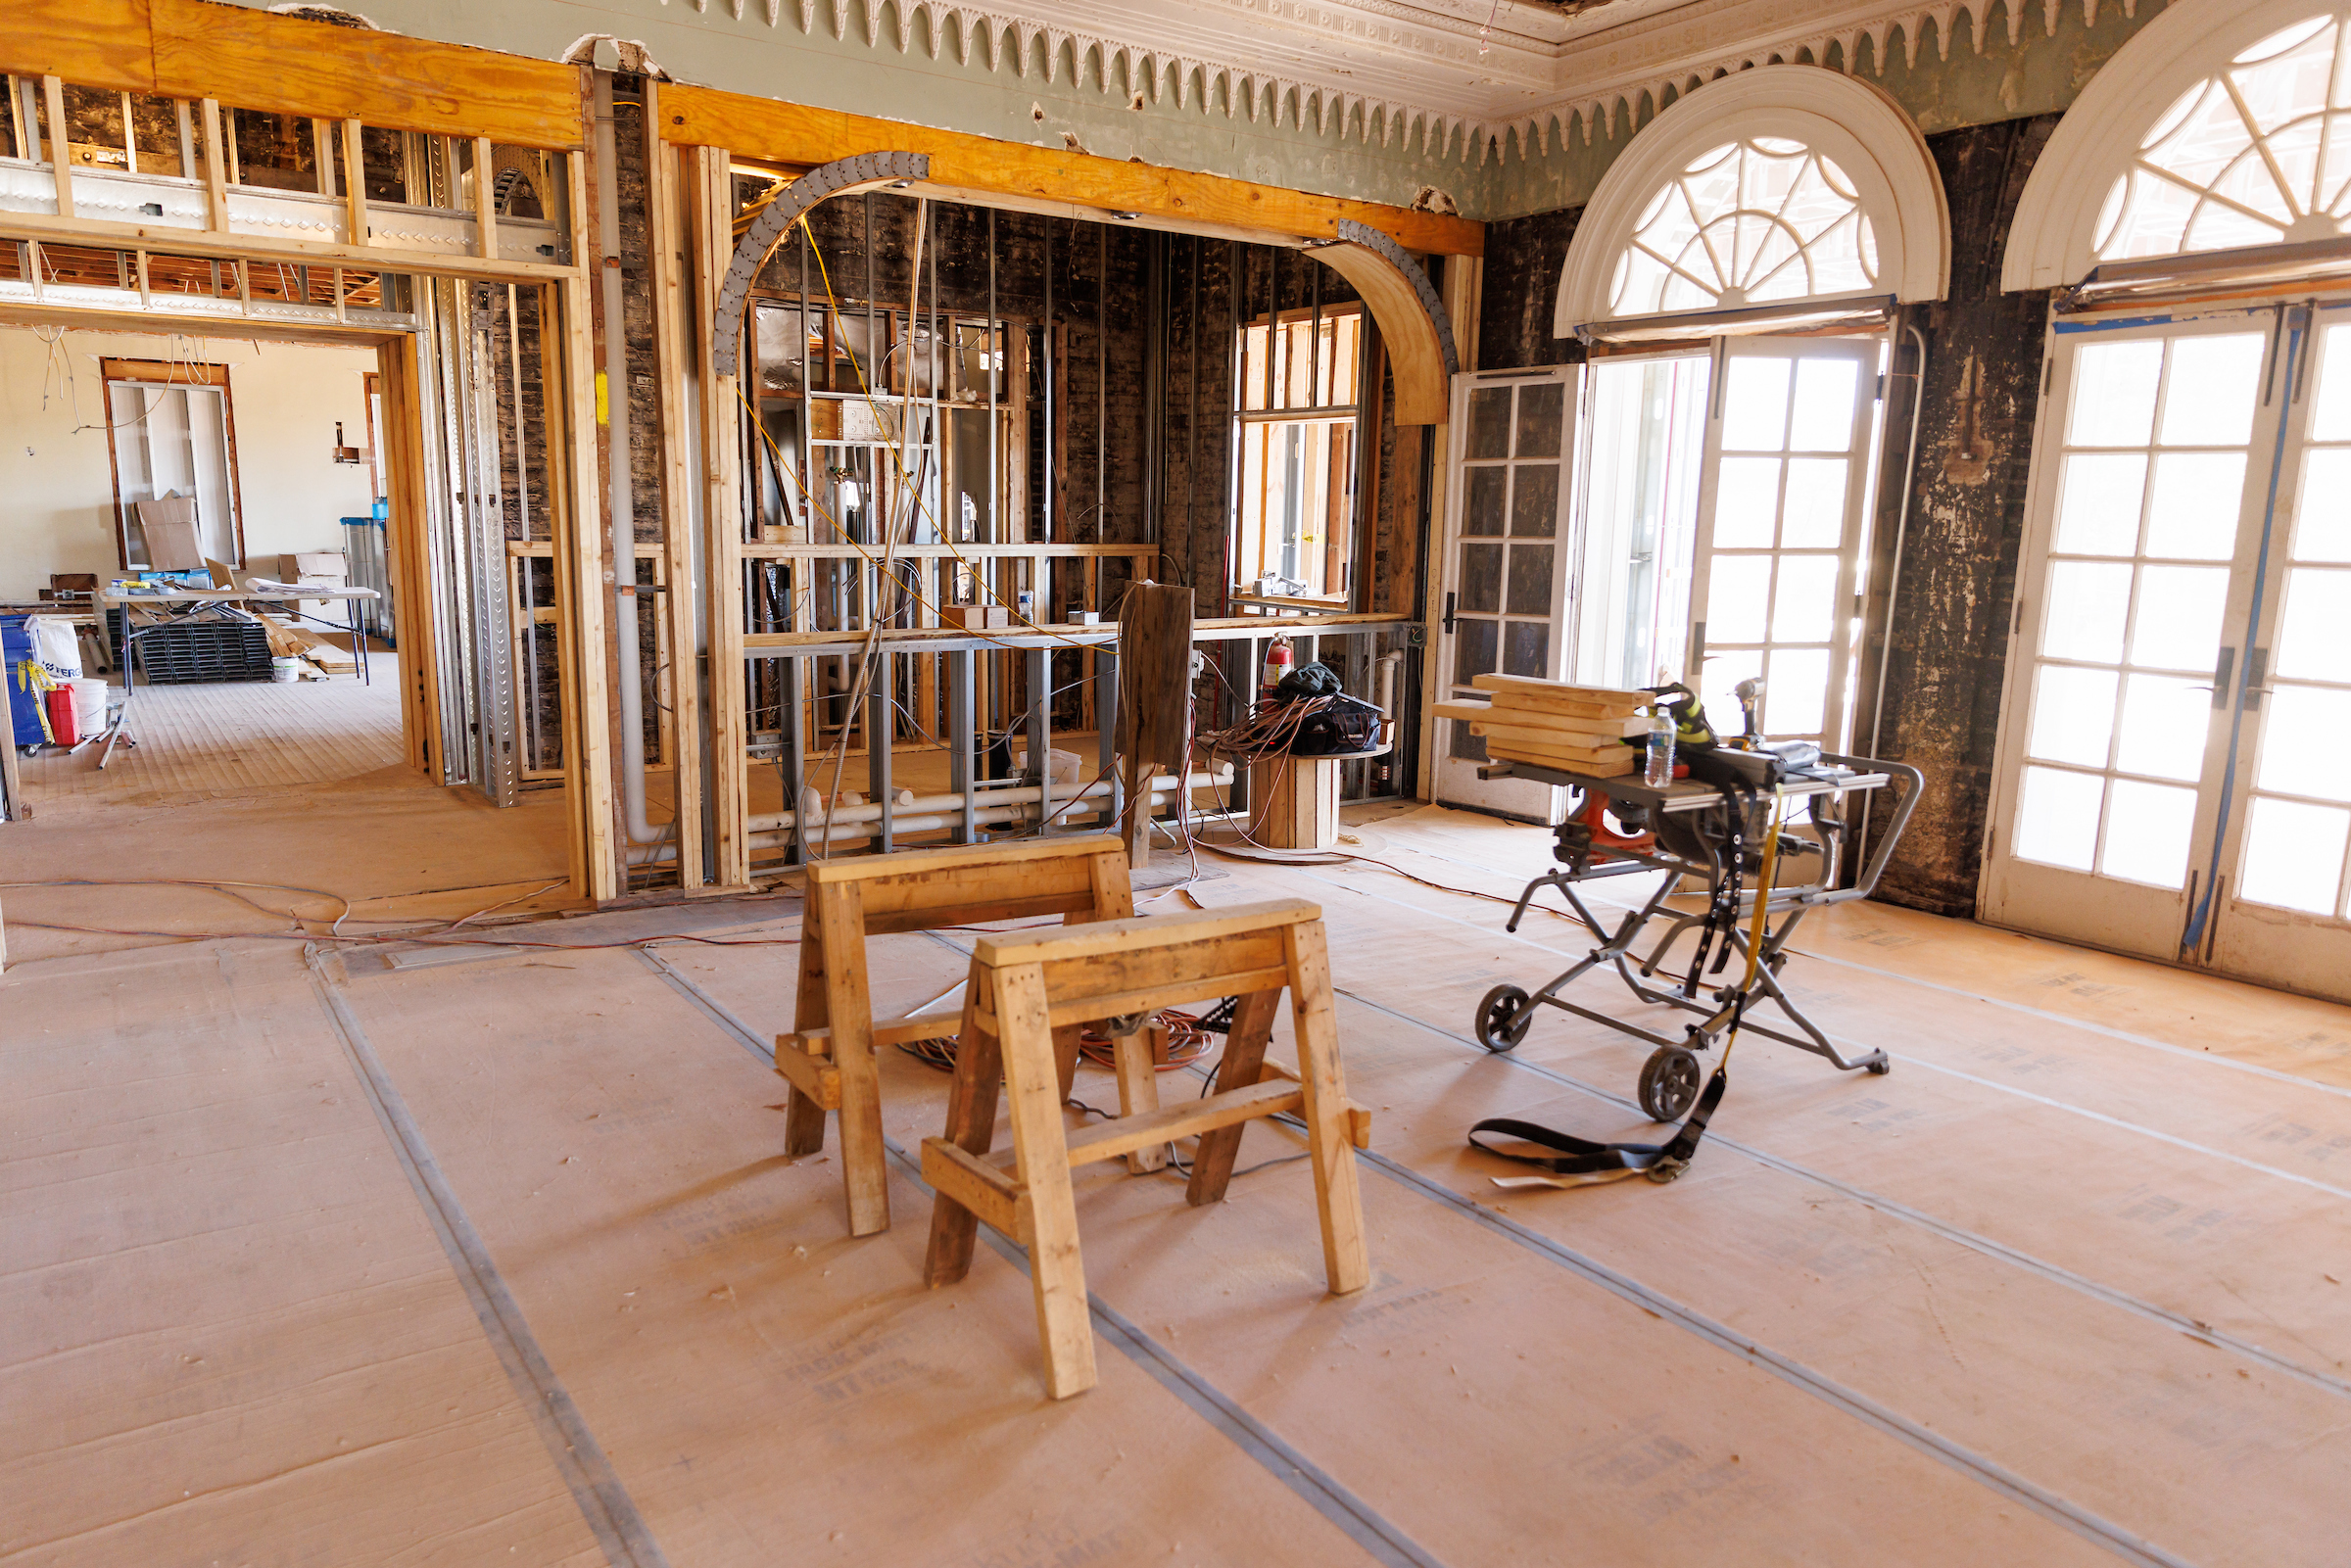 The University Club lounge during the renovation process